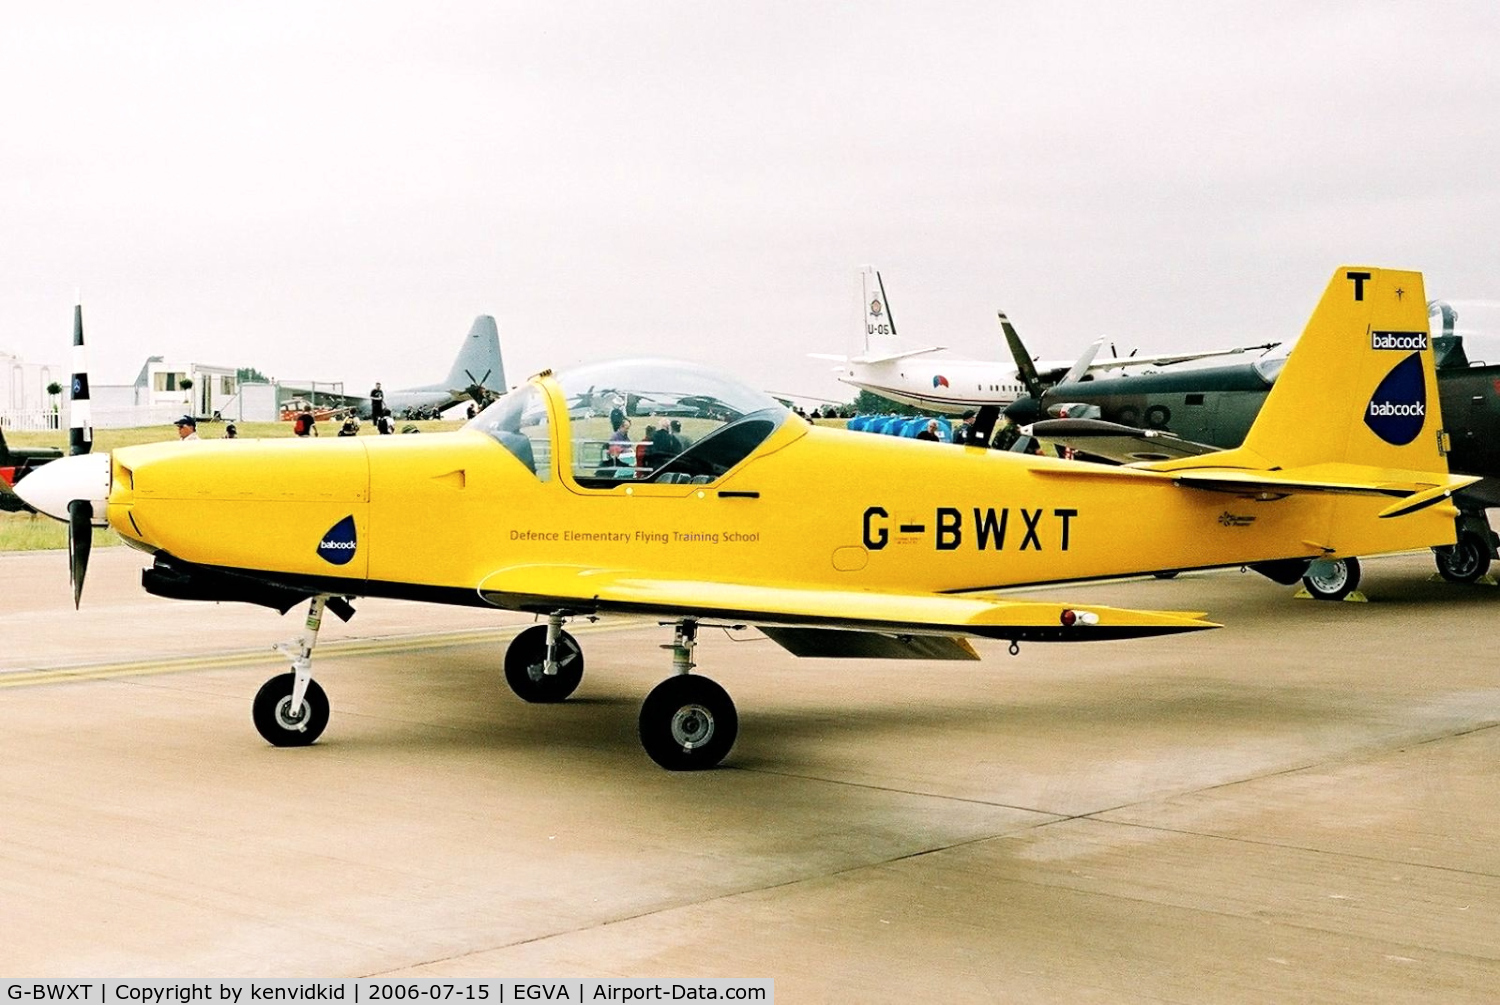 G-BWXT, 1997 Slingsby T-67M-260 Firefly C/N 2254, Babcock Aerospace on static display at RIAT.